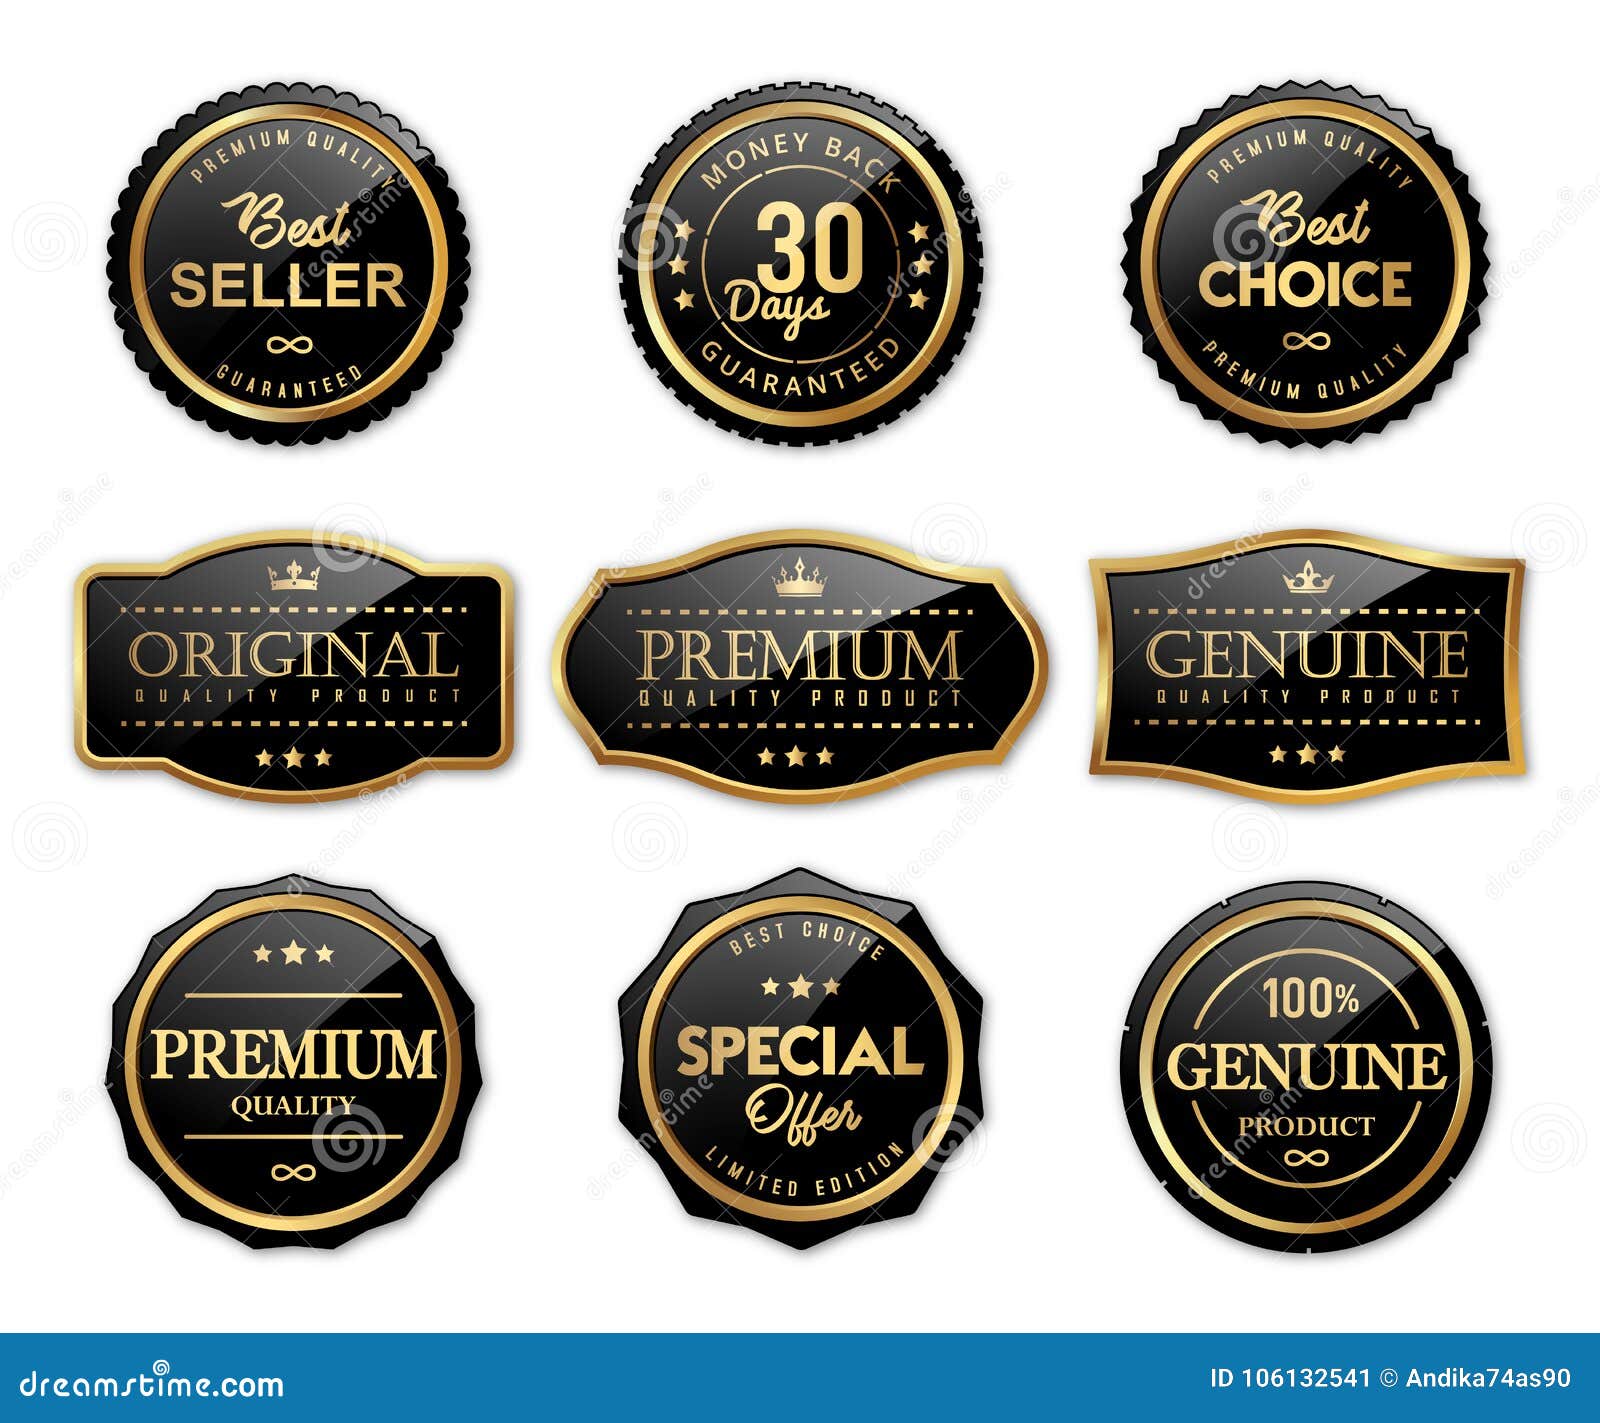 luxury seal labels and premium quality product